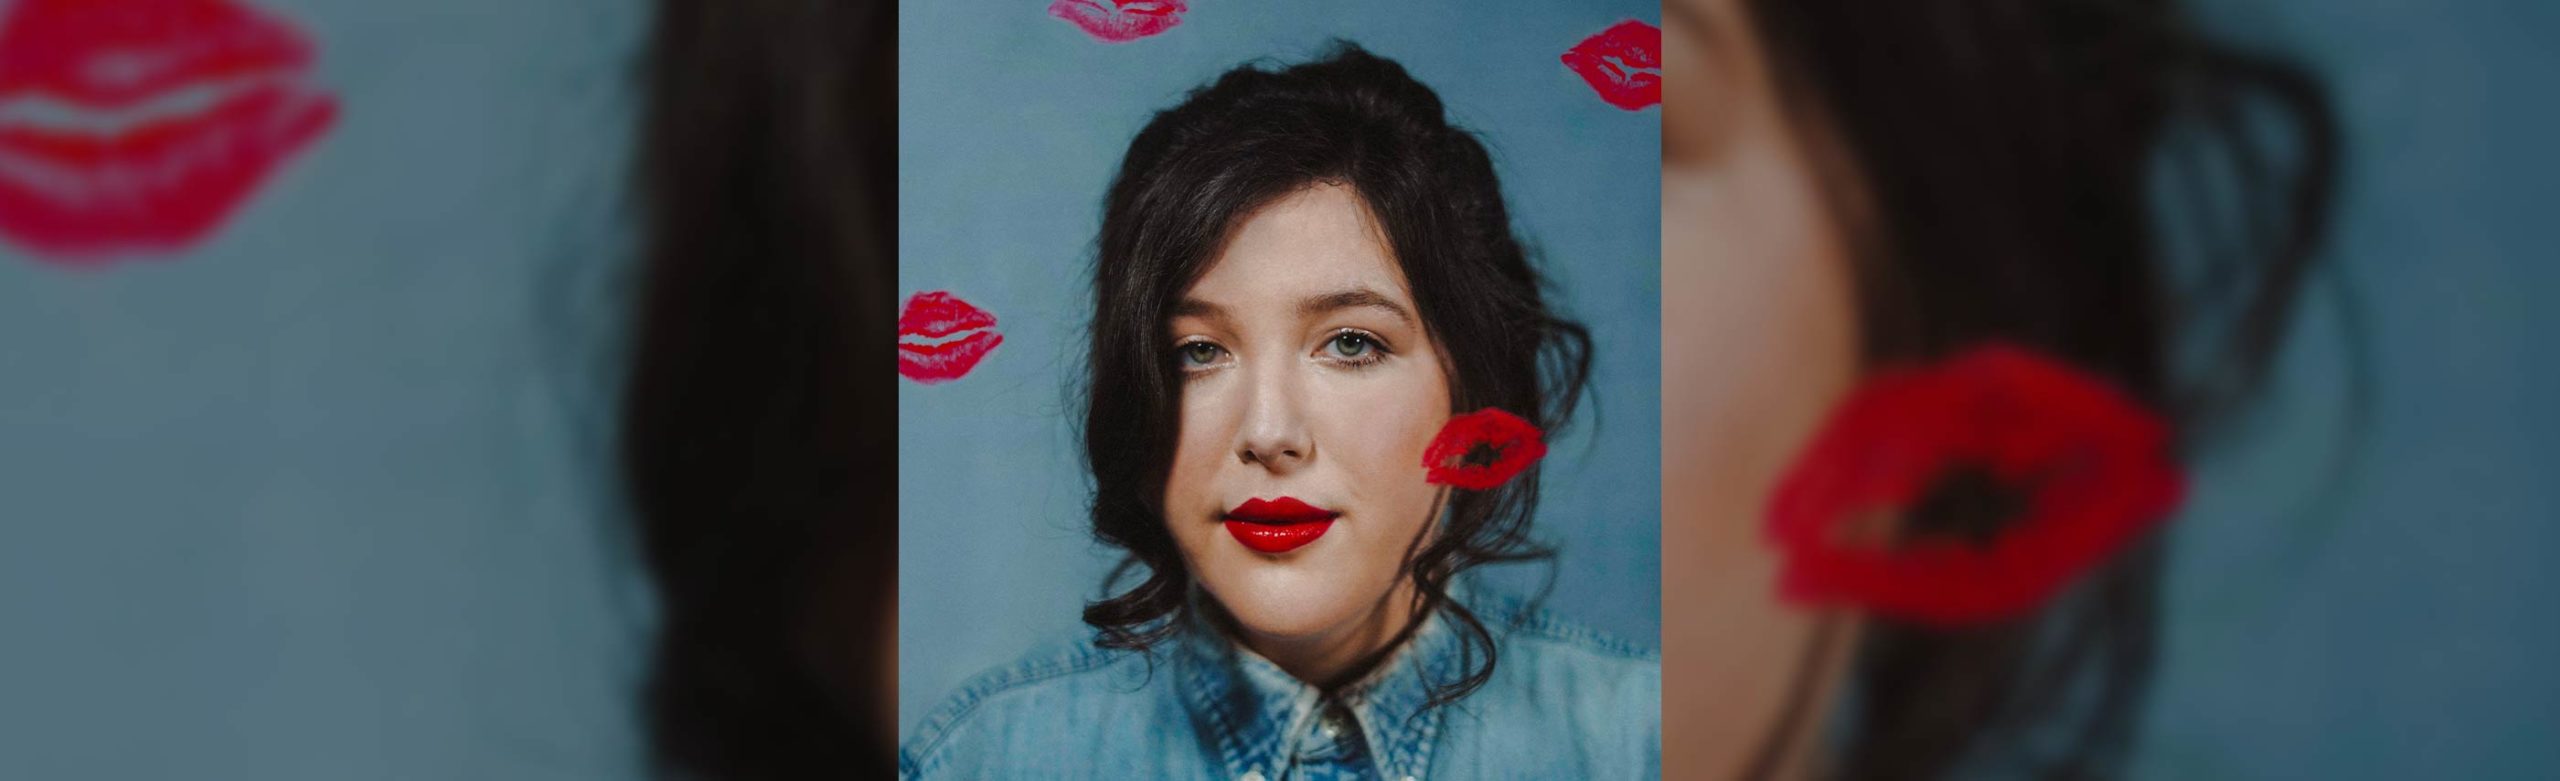 Lucy Dacus Tickets + Merch Prize Pack Giveaway 2022 Image